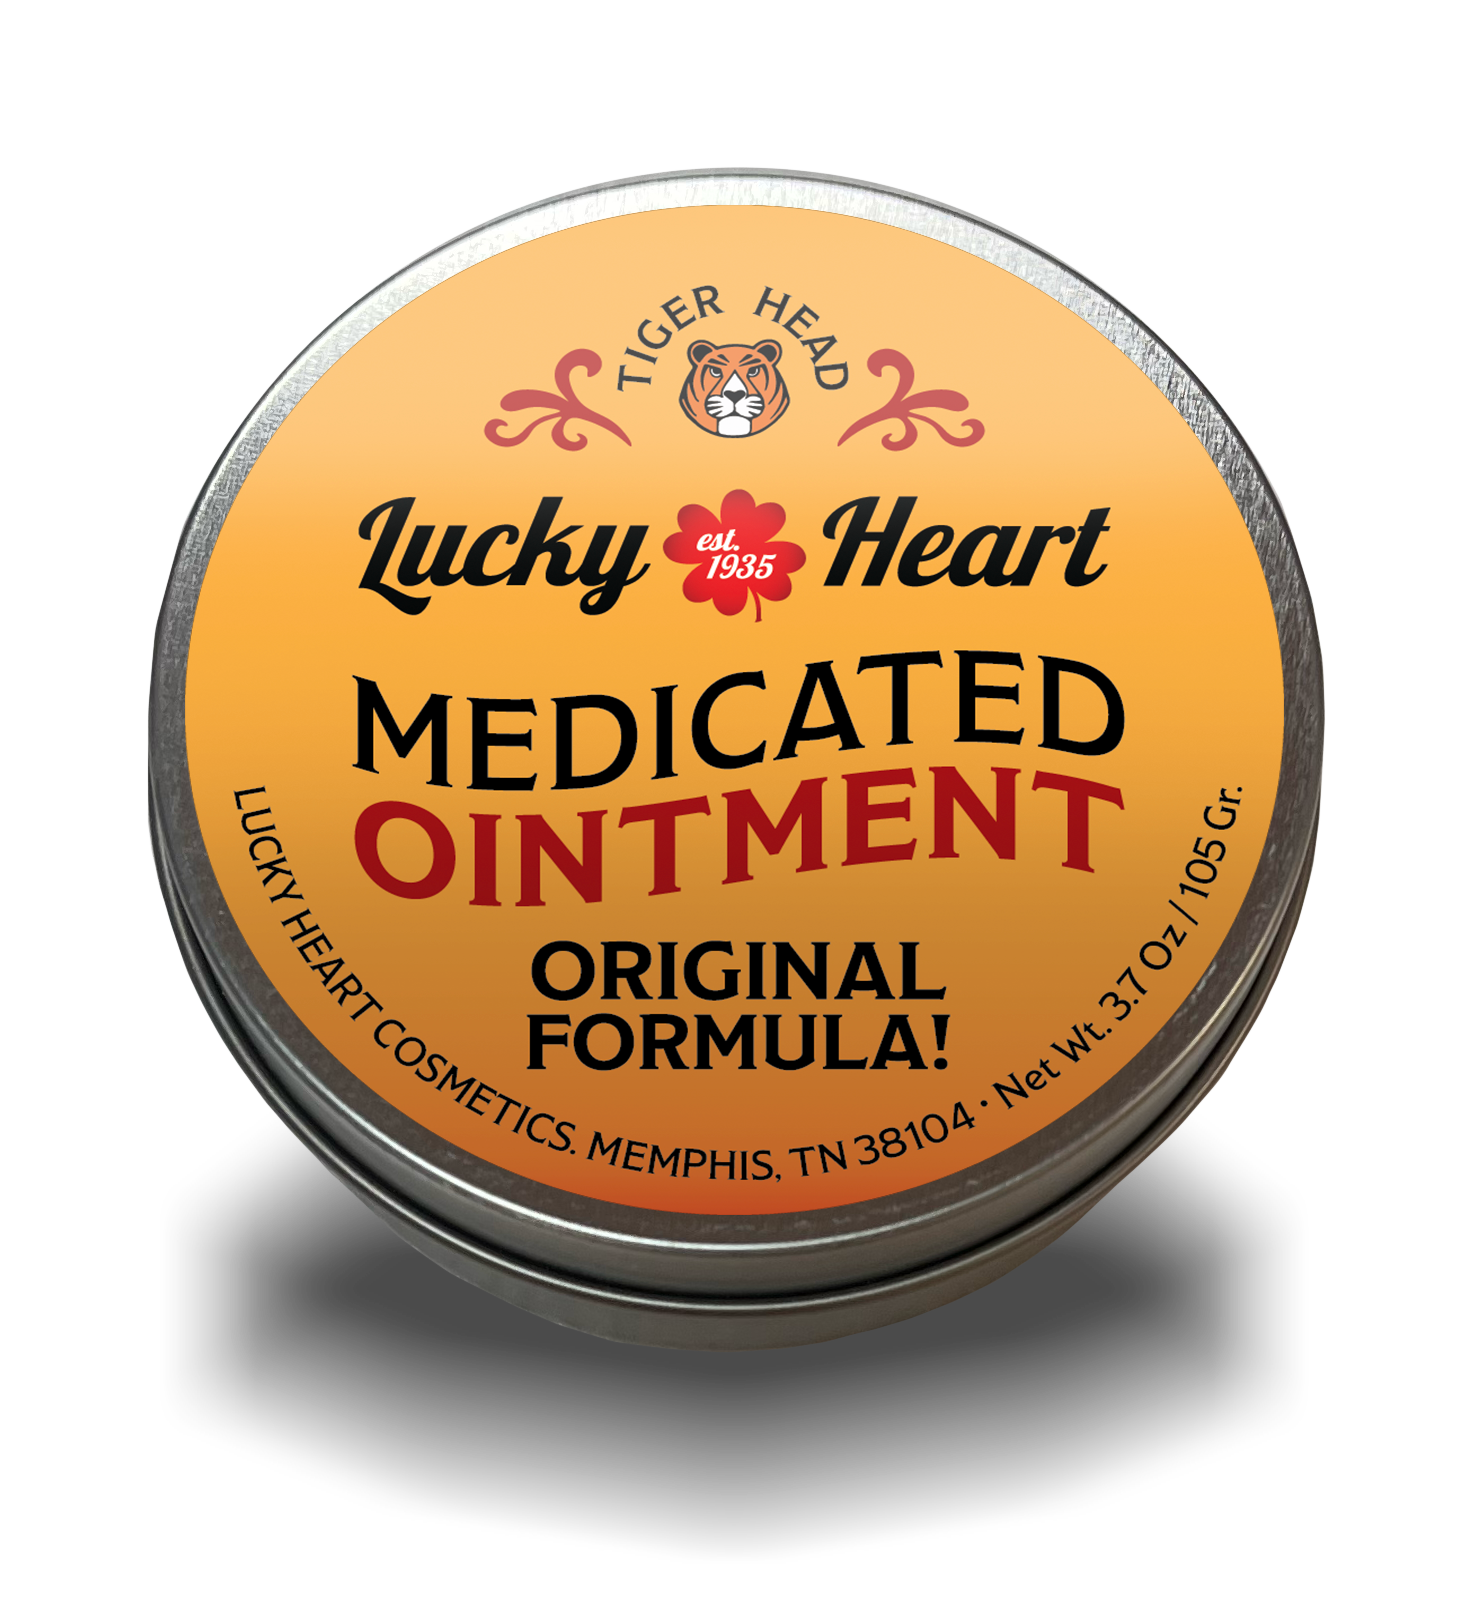 Tiger Head Medicated Ointment